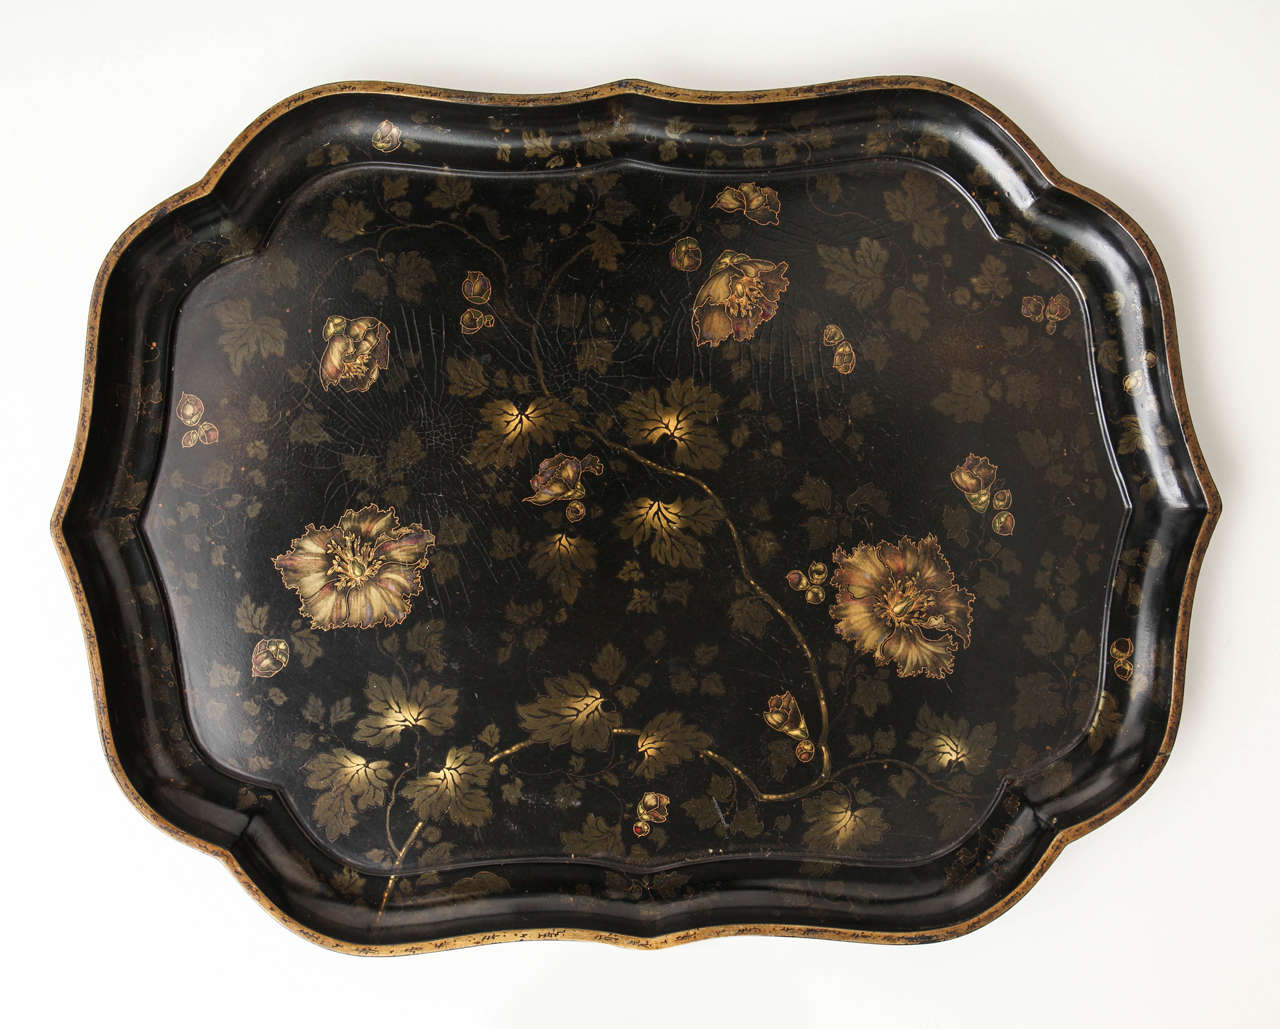 A 19th century English shaped papier mâché tray with polychrome and gilt-decorated trailing floral decoration, stamped Jennens & Bettridge's London with a Royal Warrant Crown, circa 1850